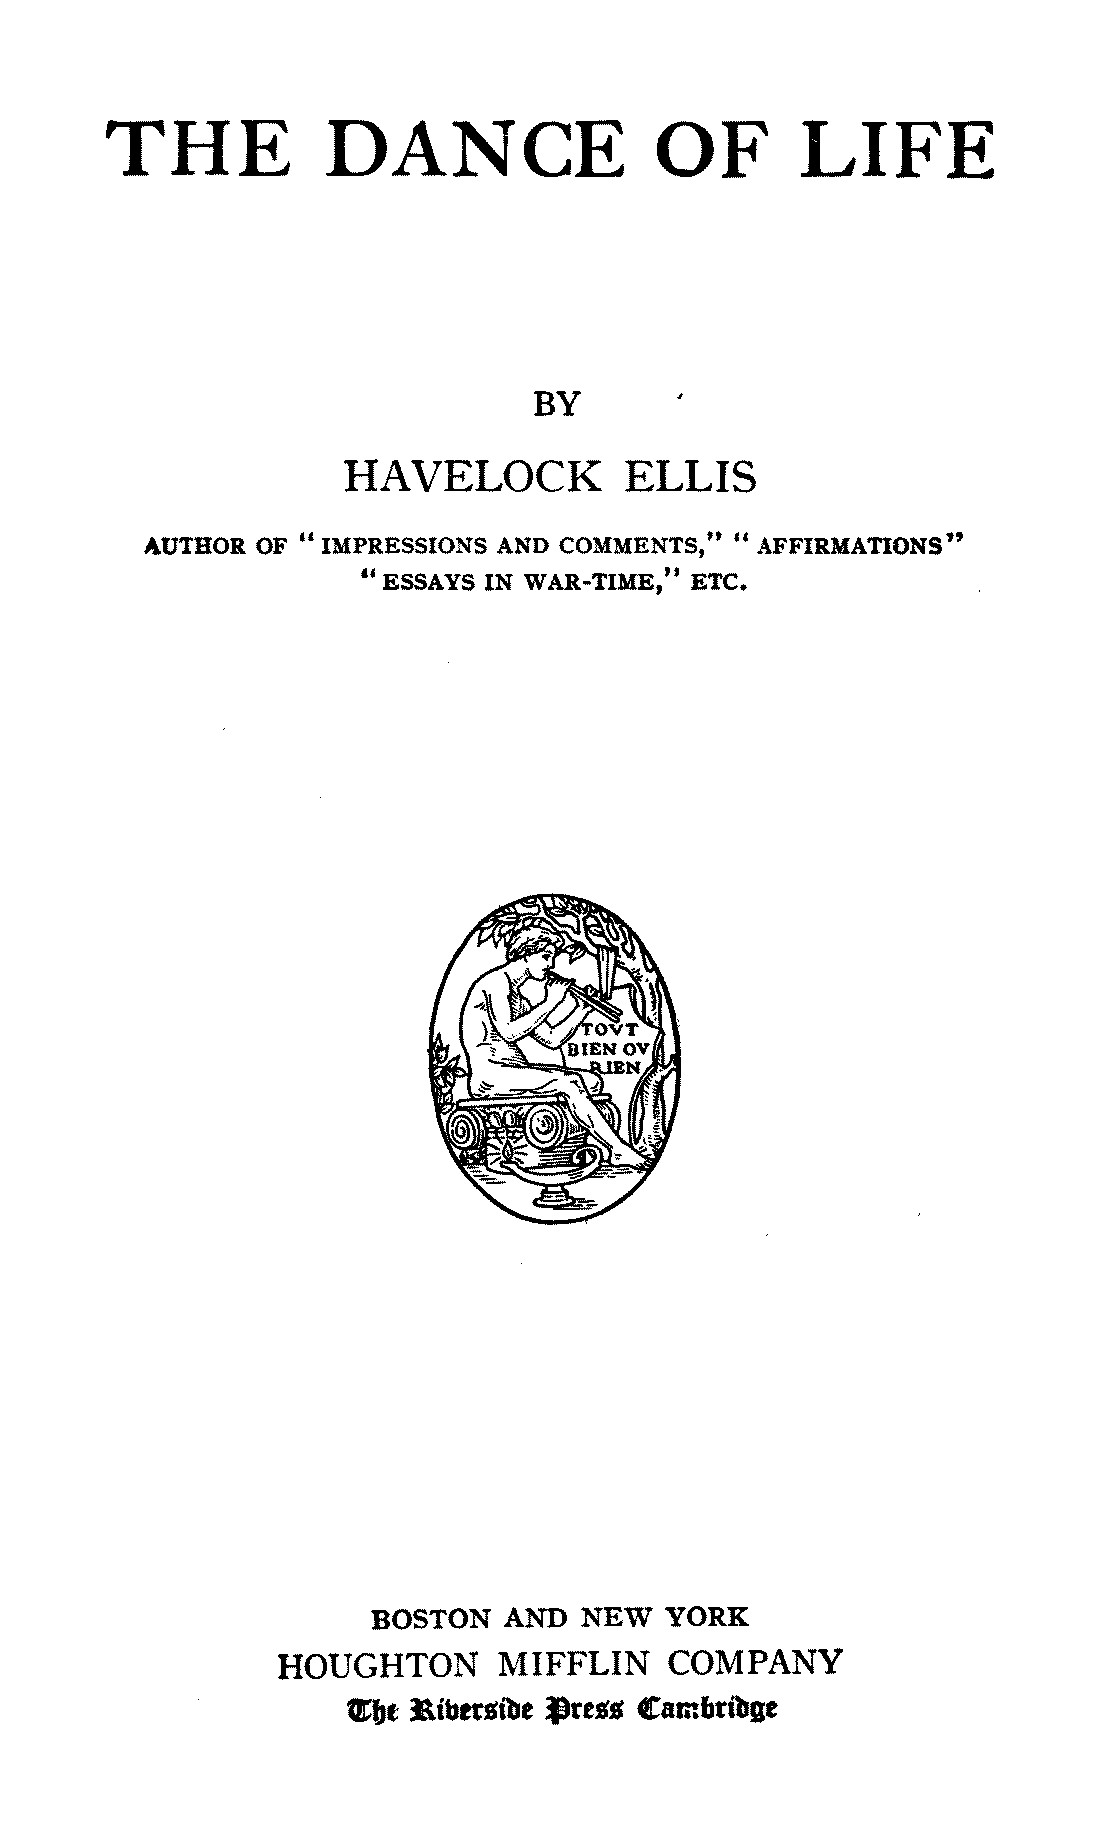 The Project Gutenberg eBook of The Dance of Life, by Havelock Ellis pic